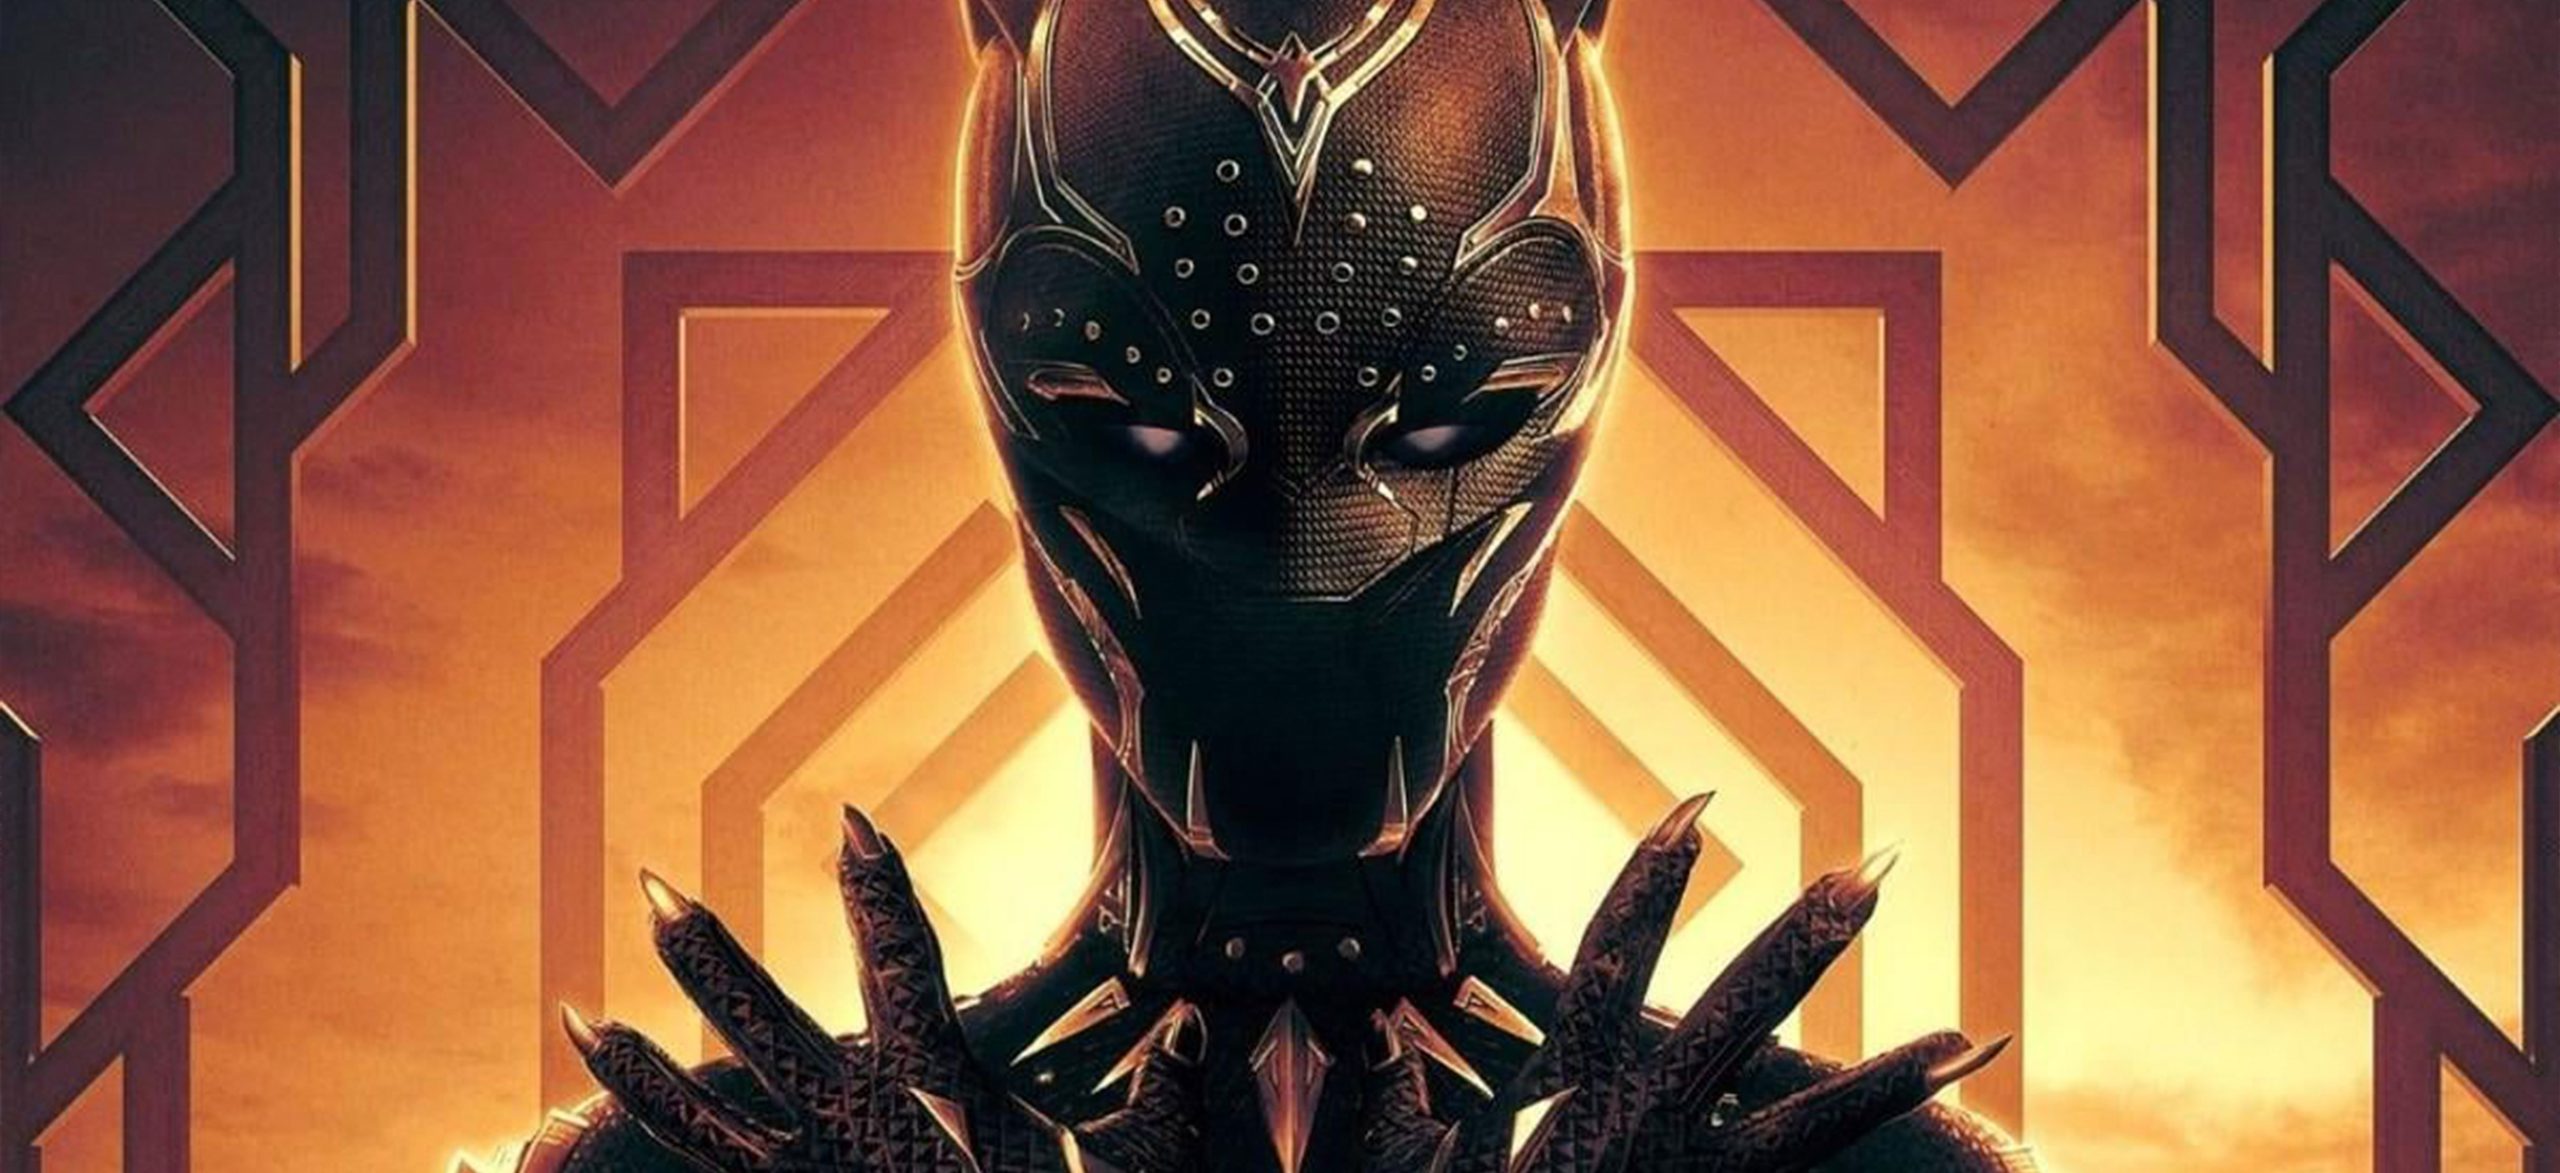 Background image for Movies On The Lawn: Black Panther Wakanda Forever